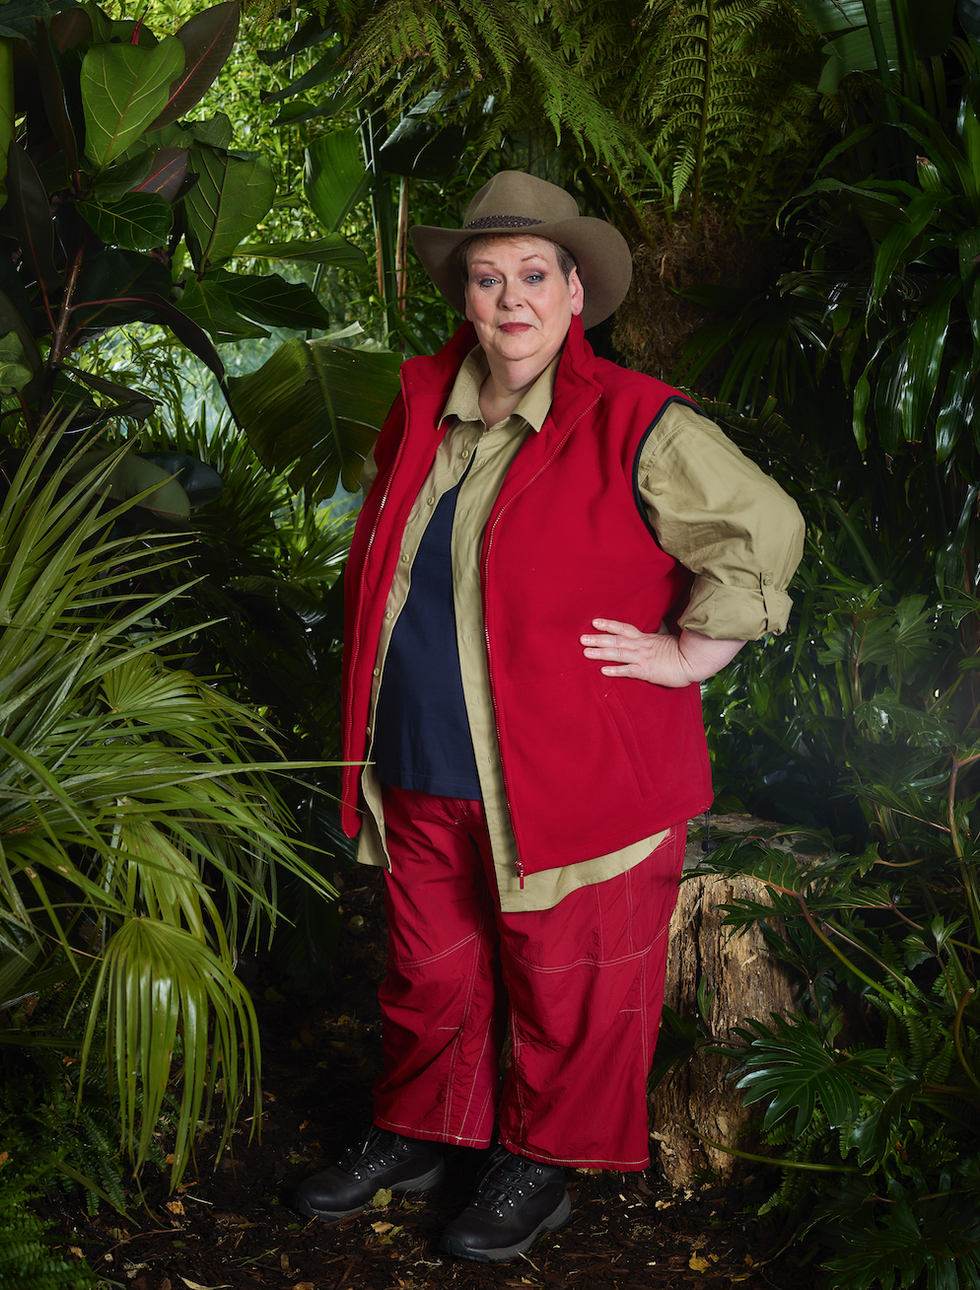 i'm a celebrity 2018 anne hegerty aka the governess embargoed 1030pm on 111218